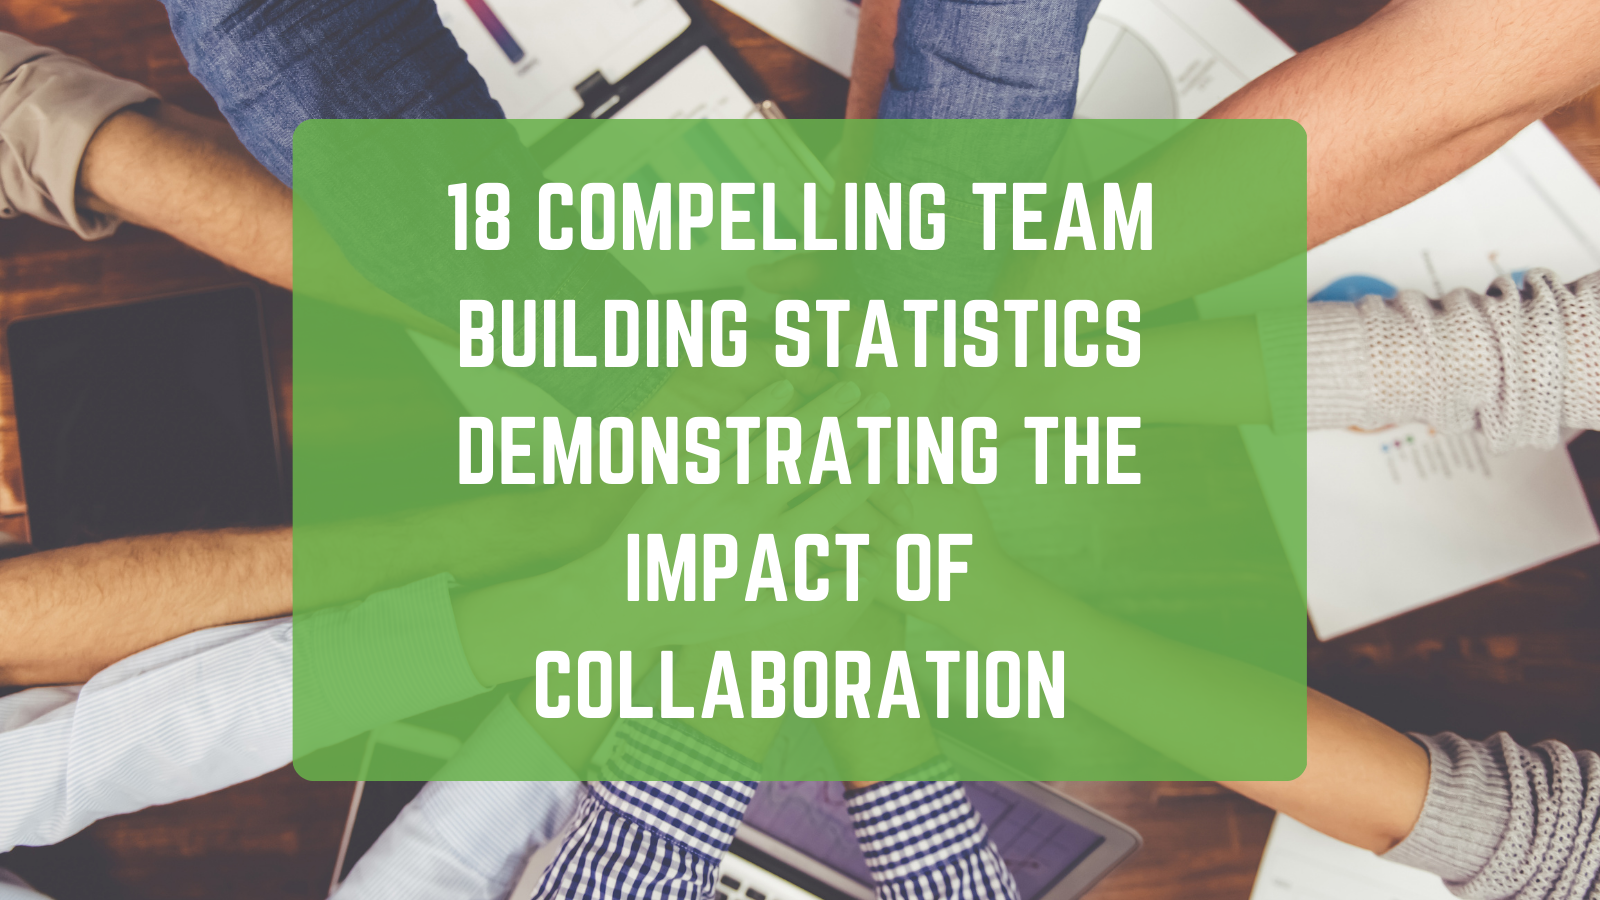 18 compelling team building statistics demonstrating the impact of collaboration